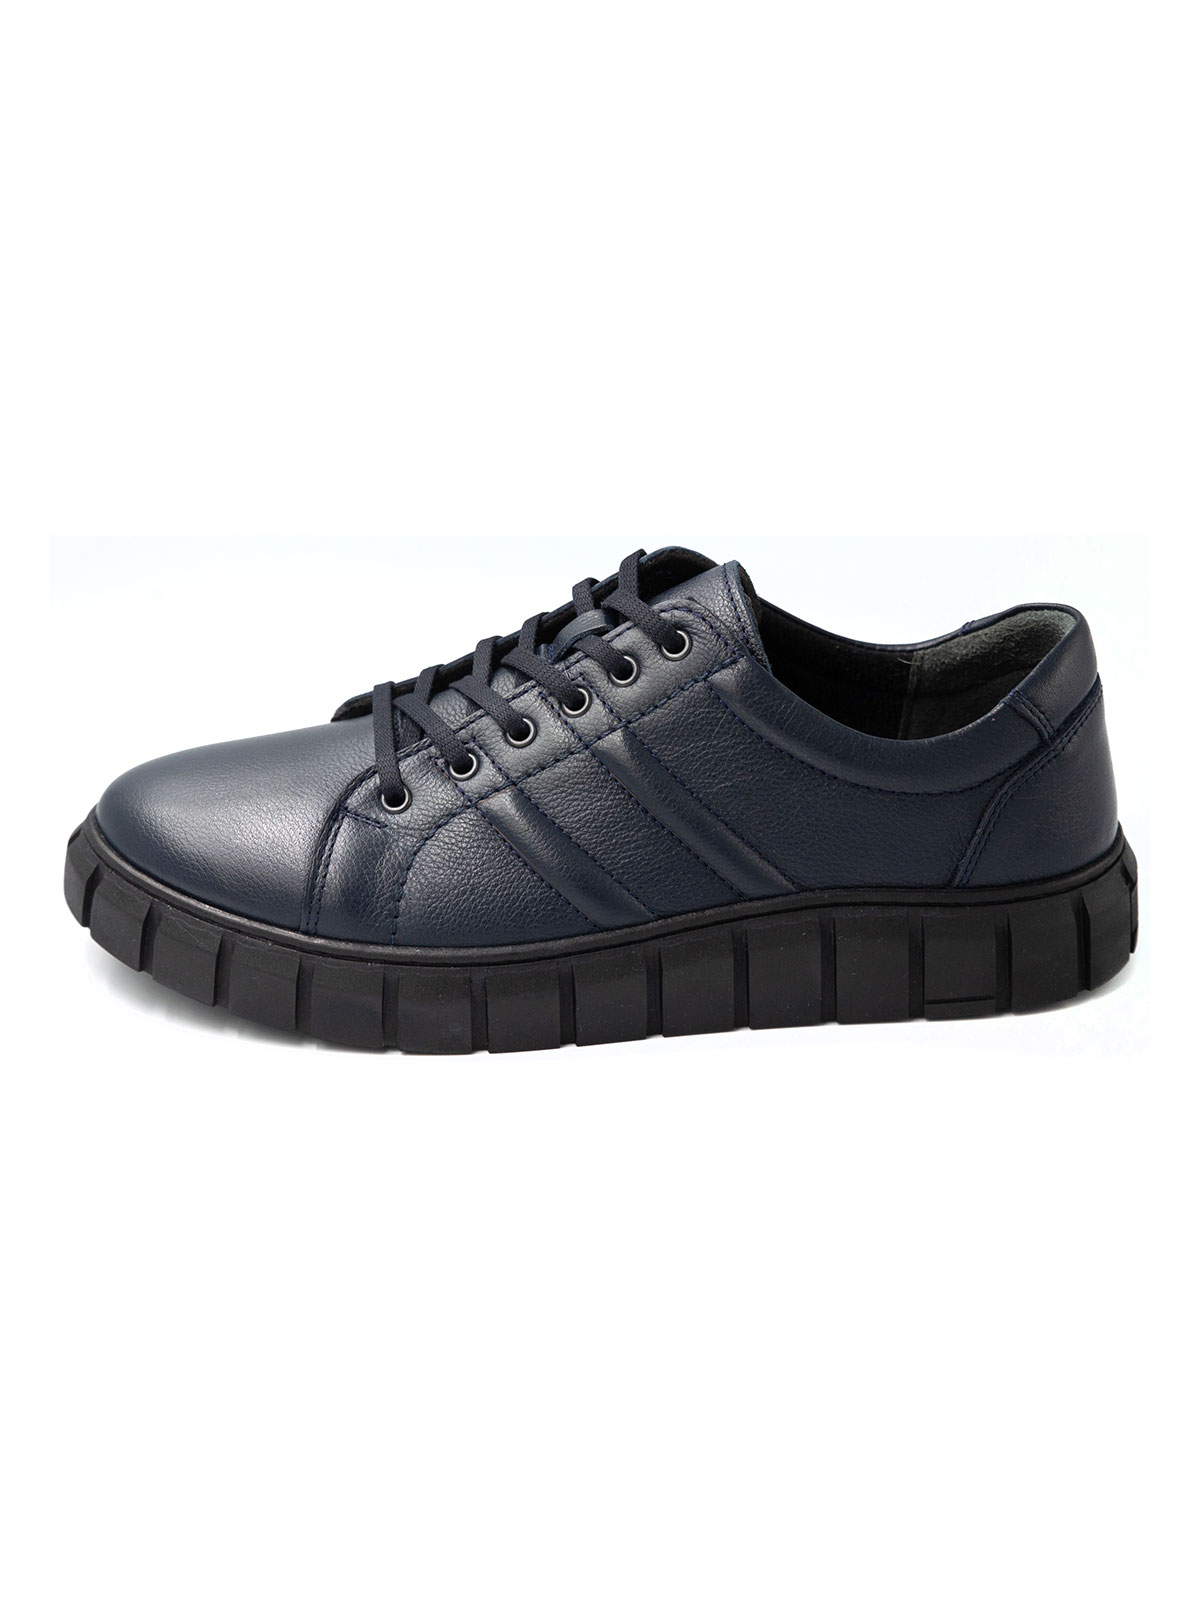 Dark blue sports leather shoes - 81098 - € 41.62 img3